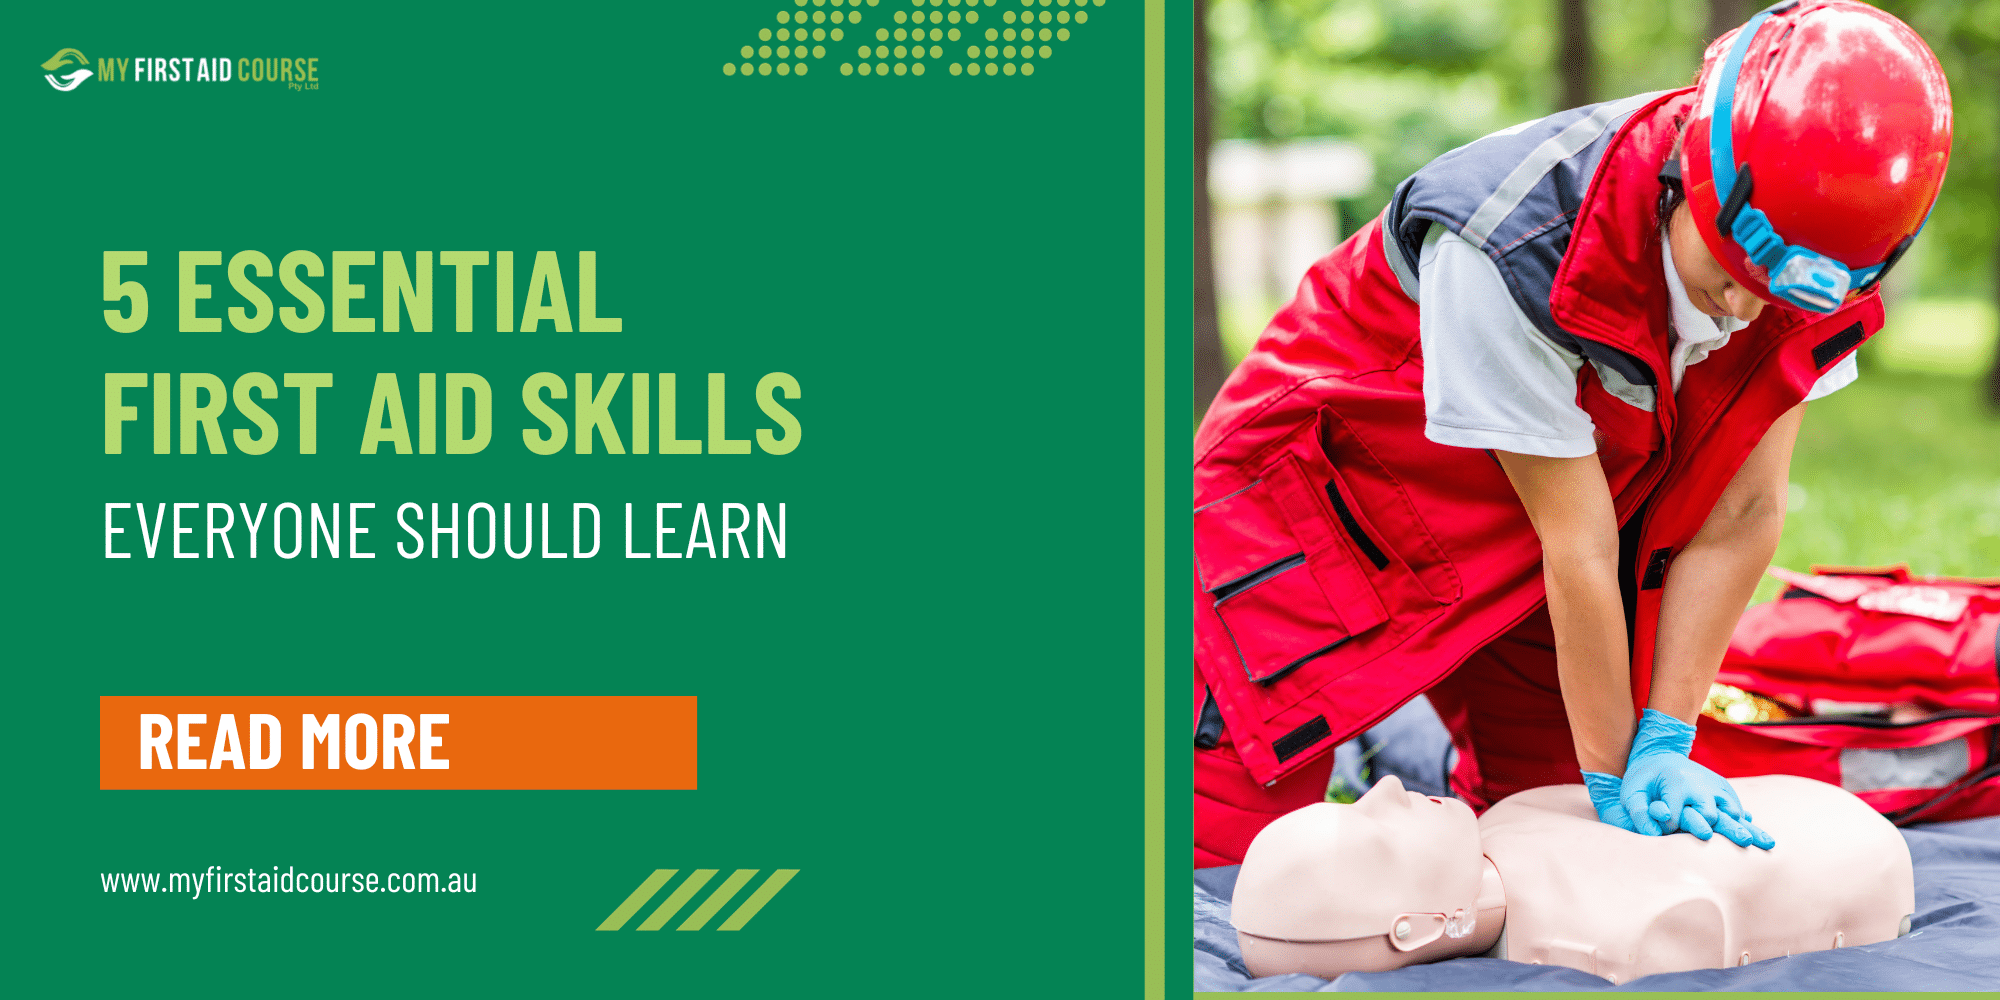 You are currently viewing 5 Essential First Aid Skills Everyone Should Learn